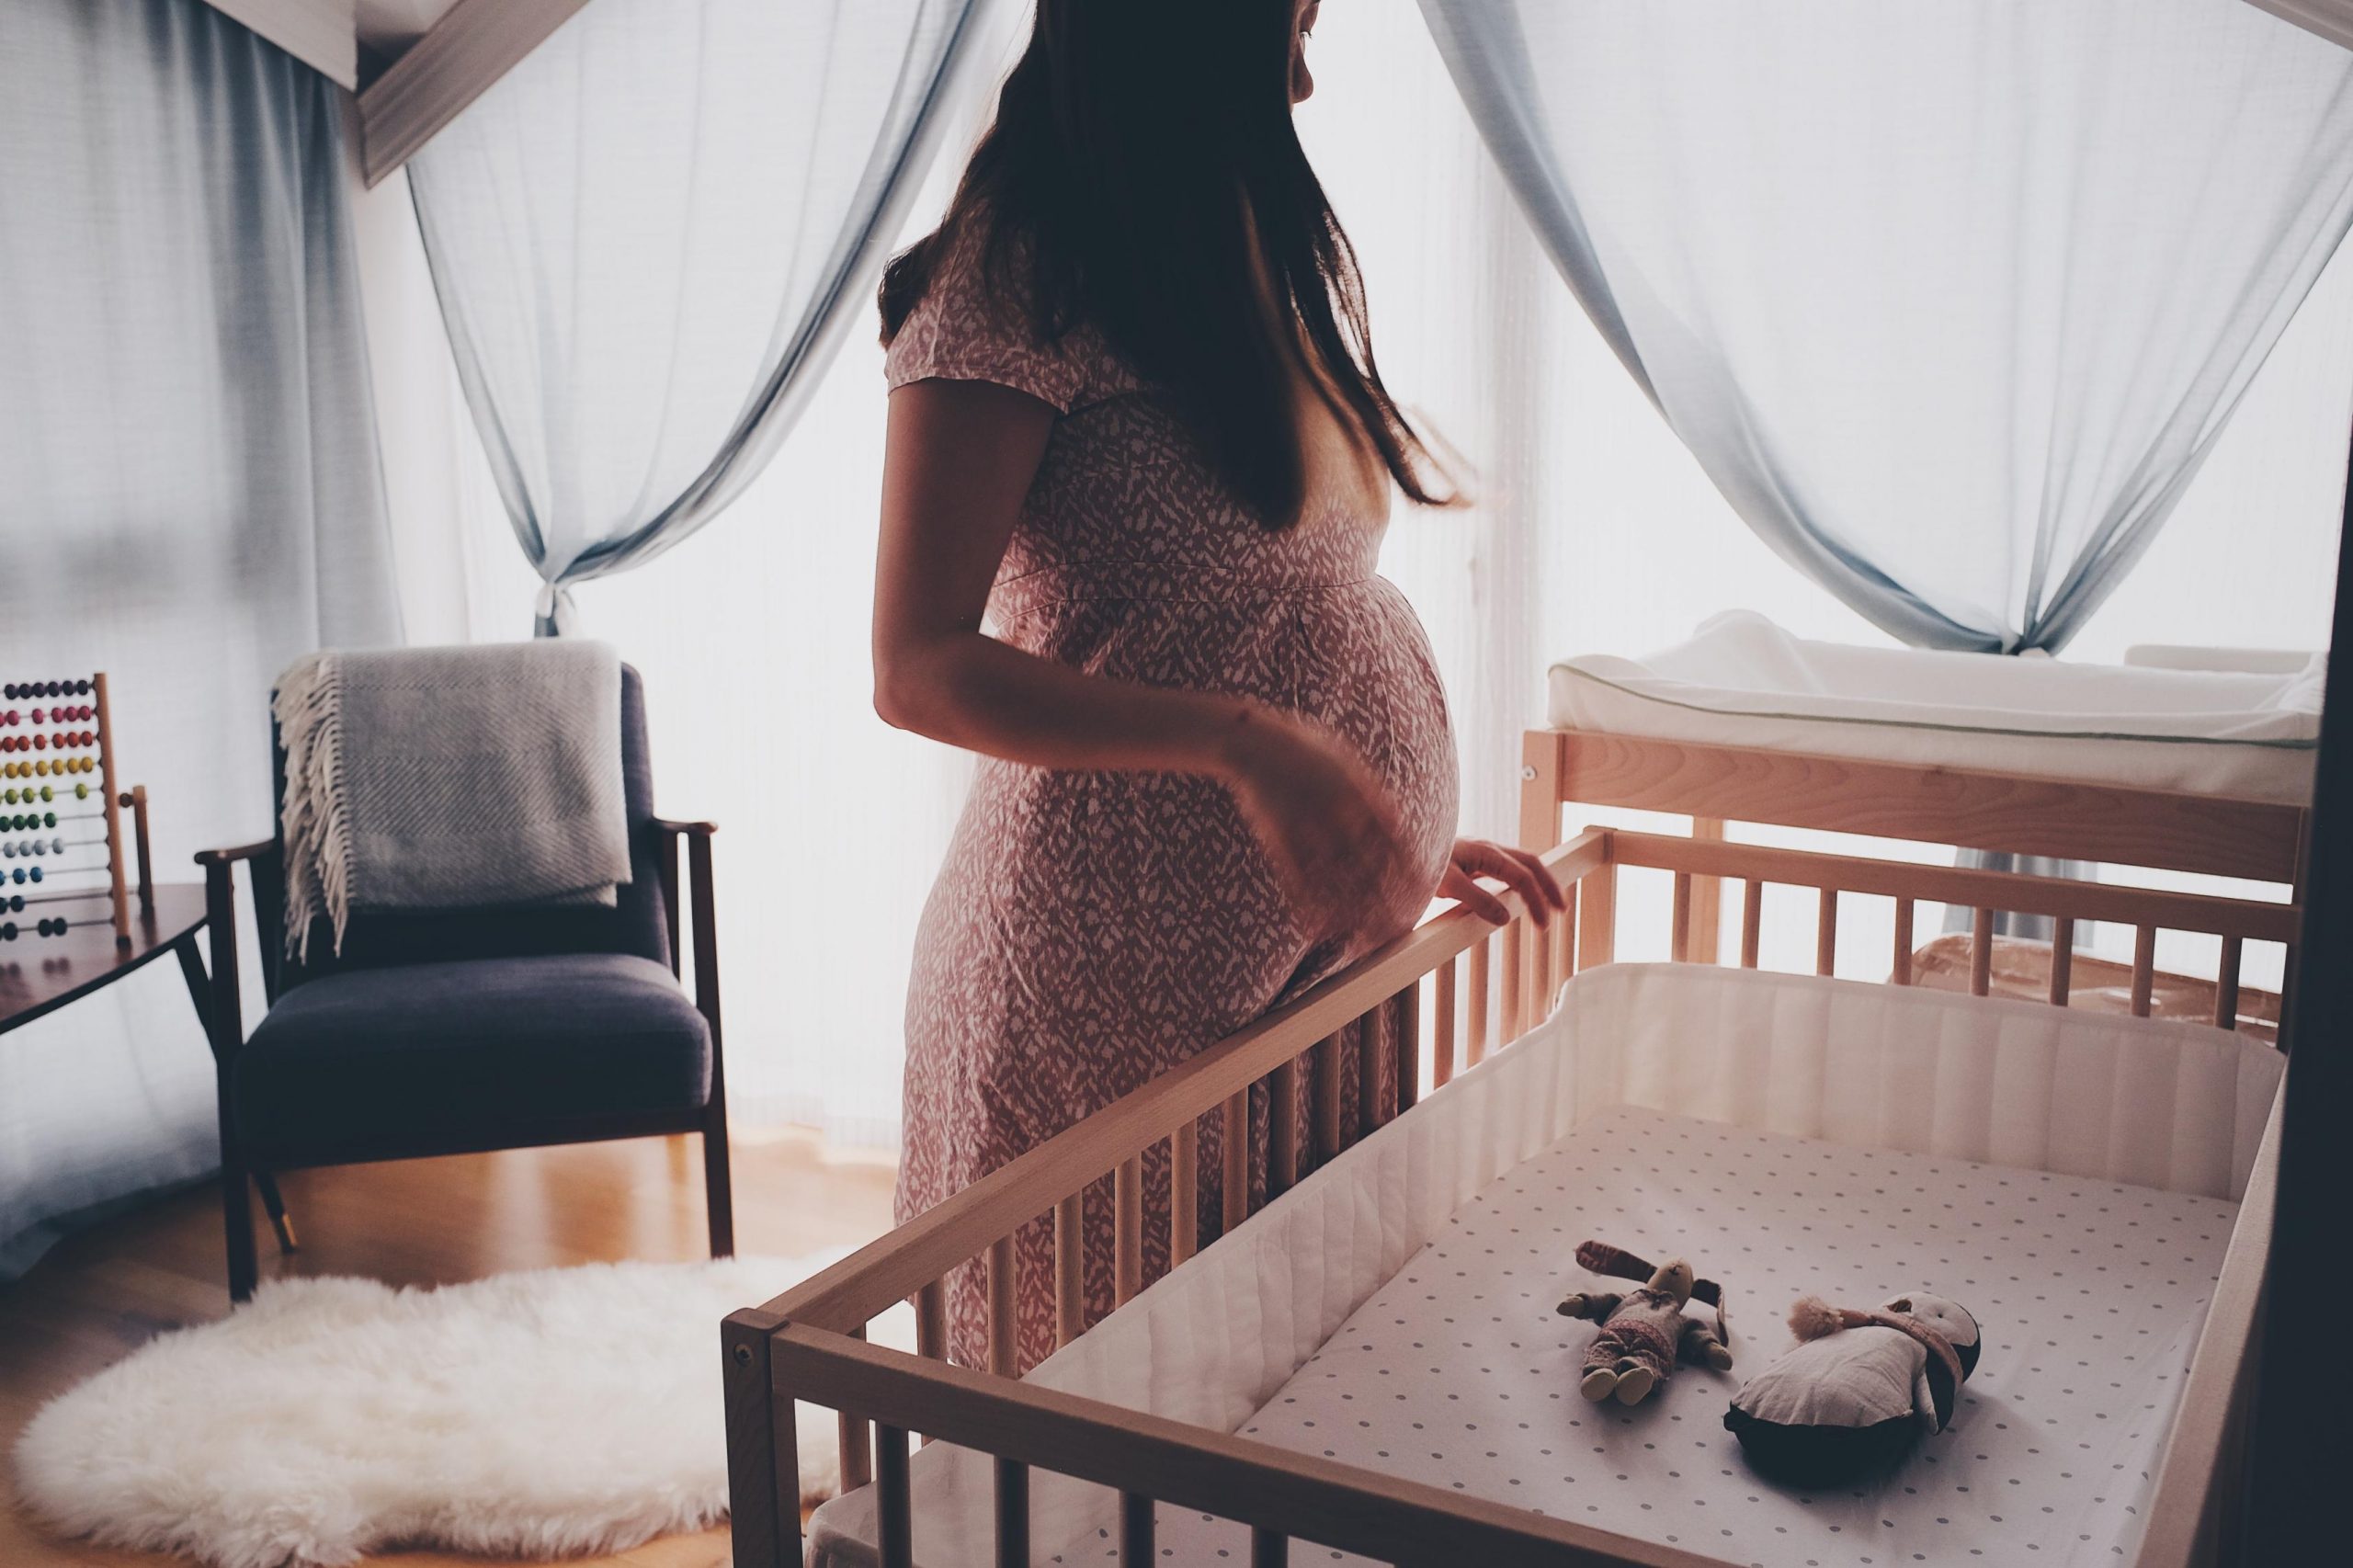 types of PMADs, expecting mother, babyproofing